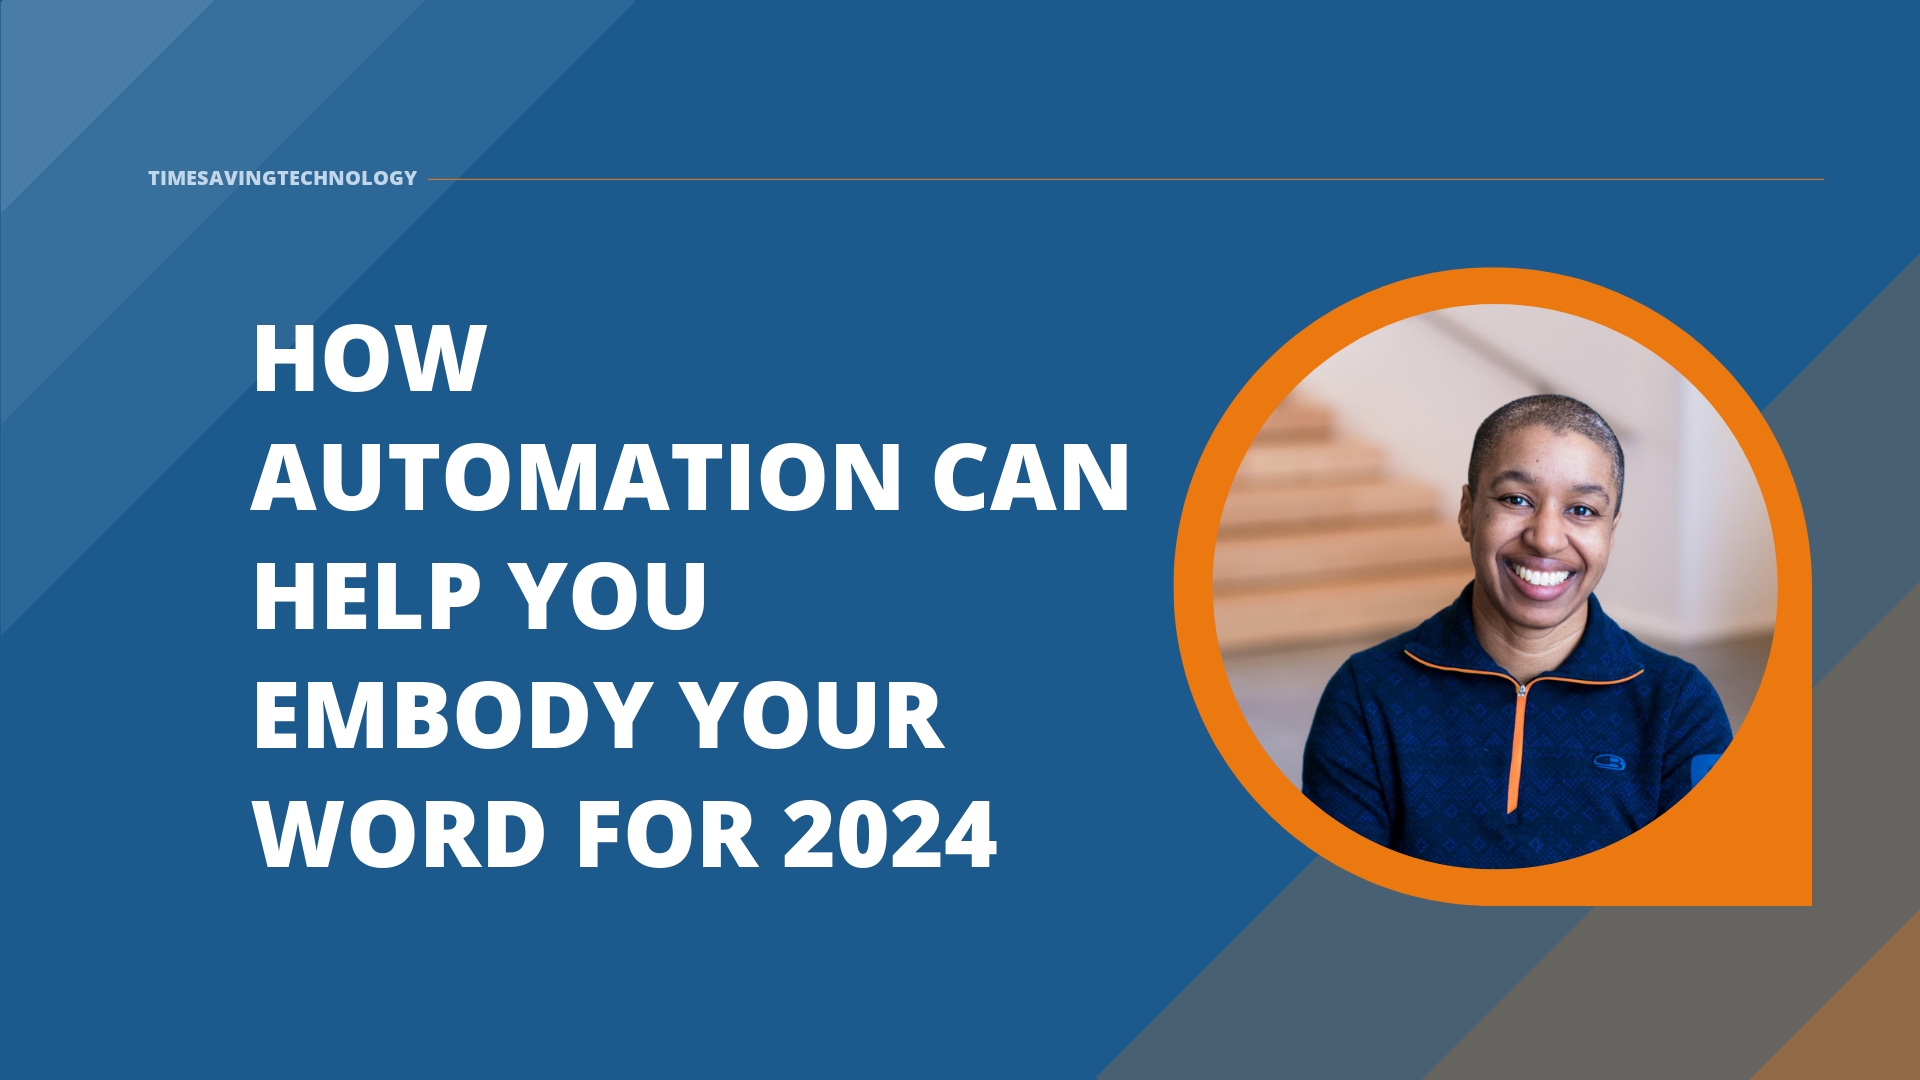 How Automation Can Help You Embody Your Word for 2024